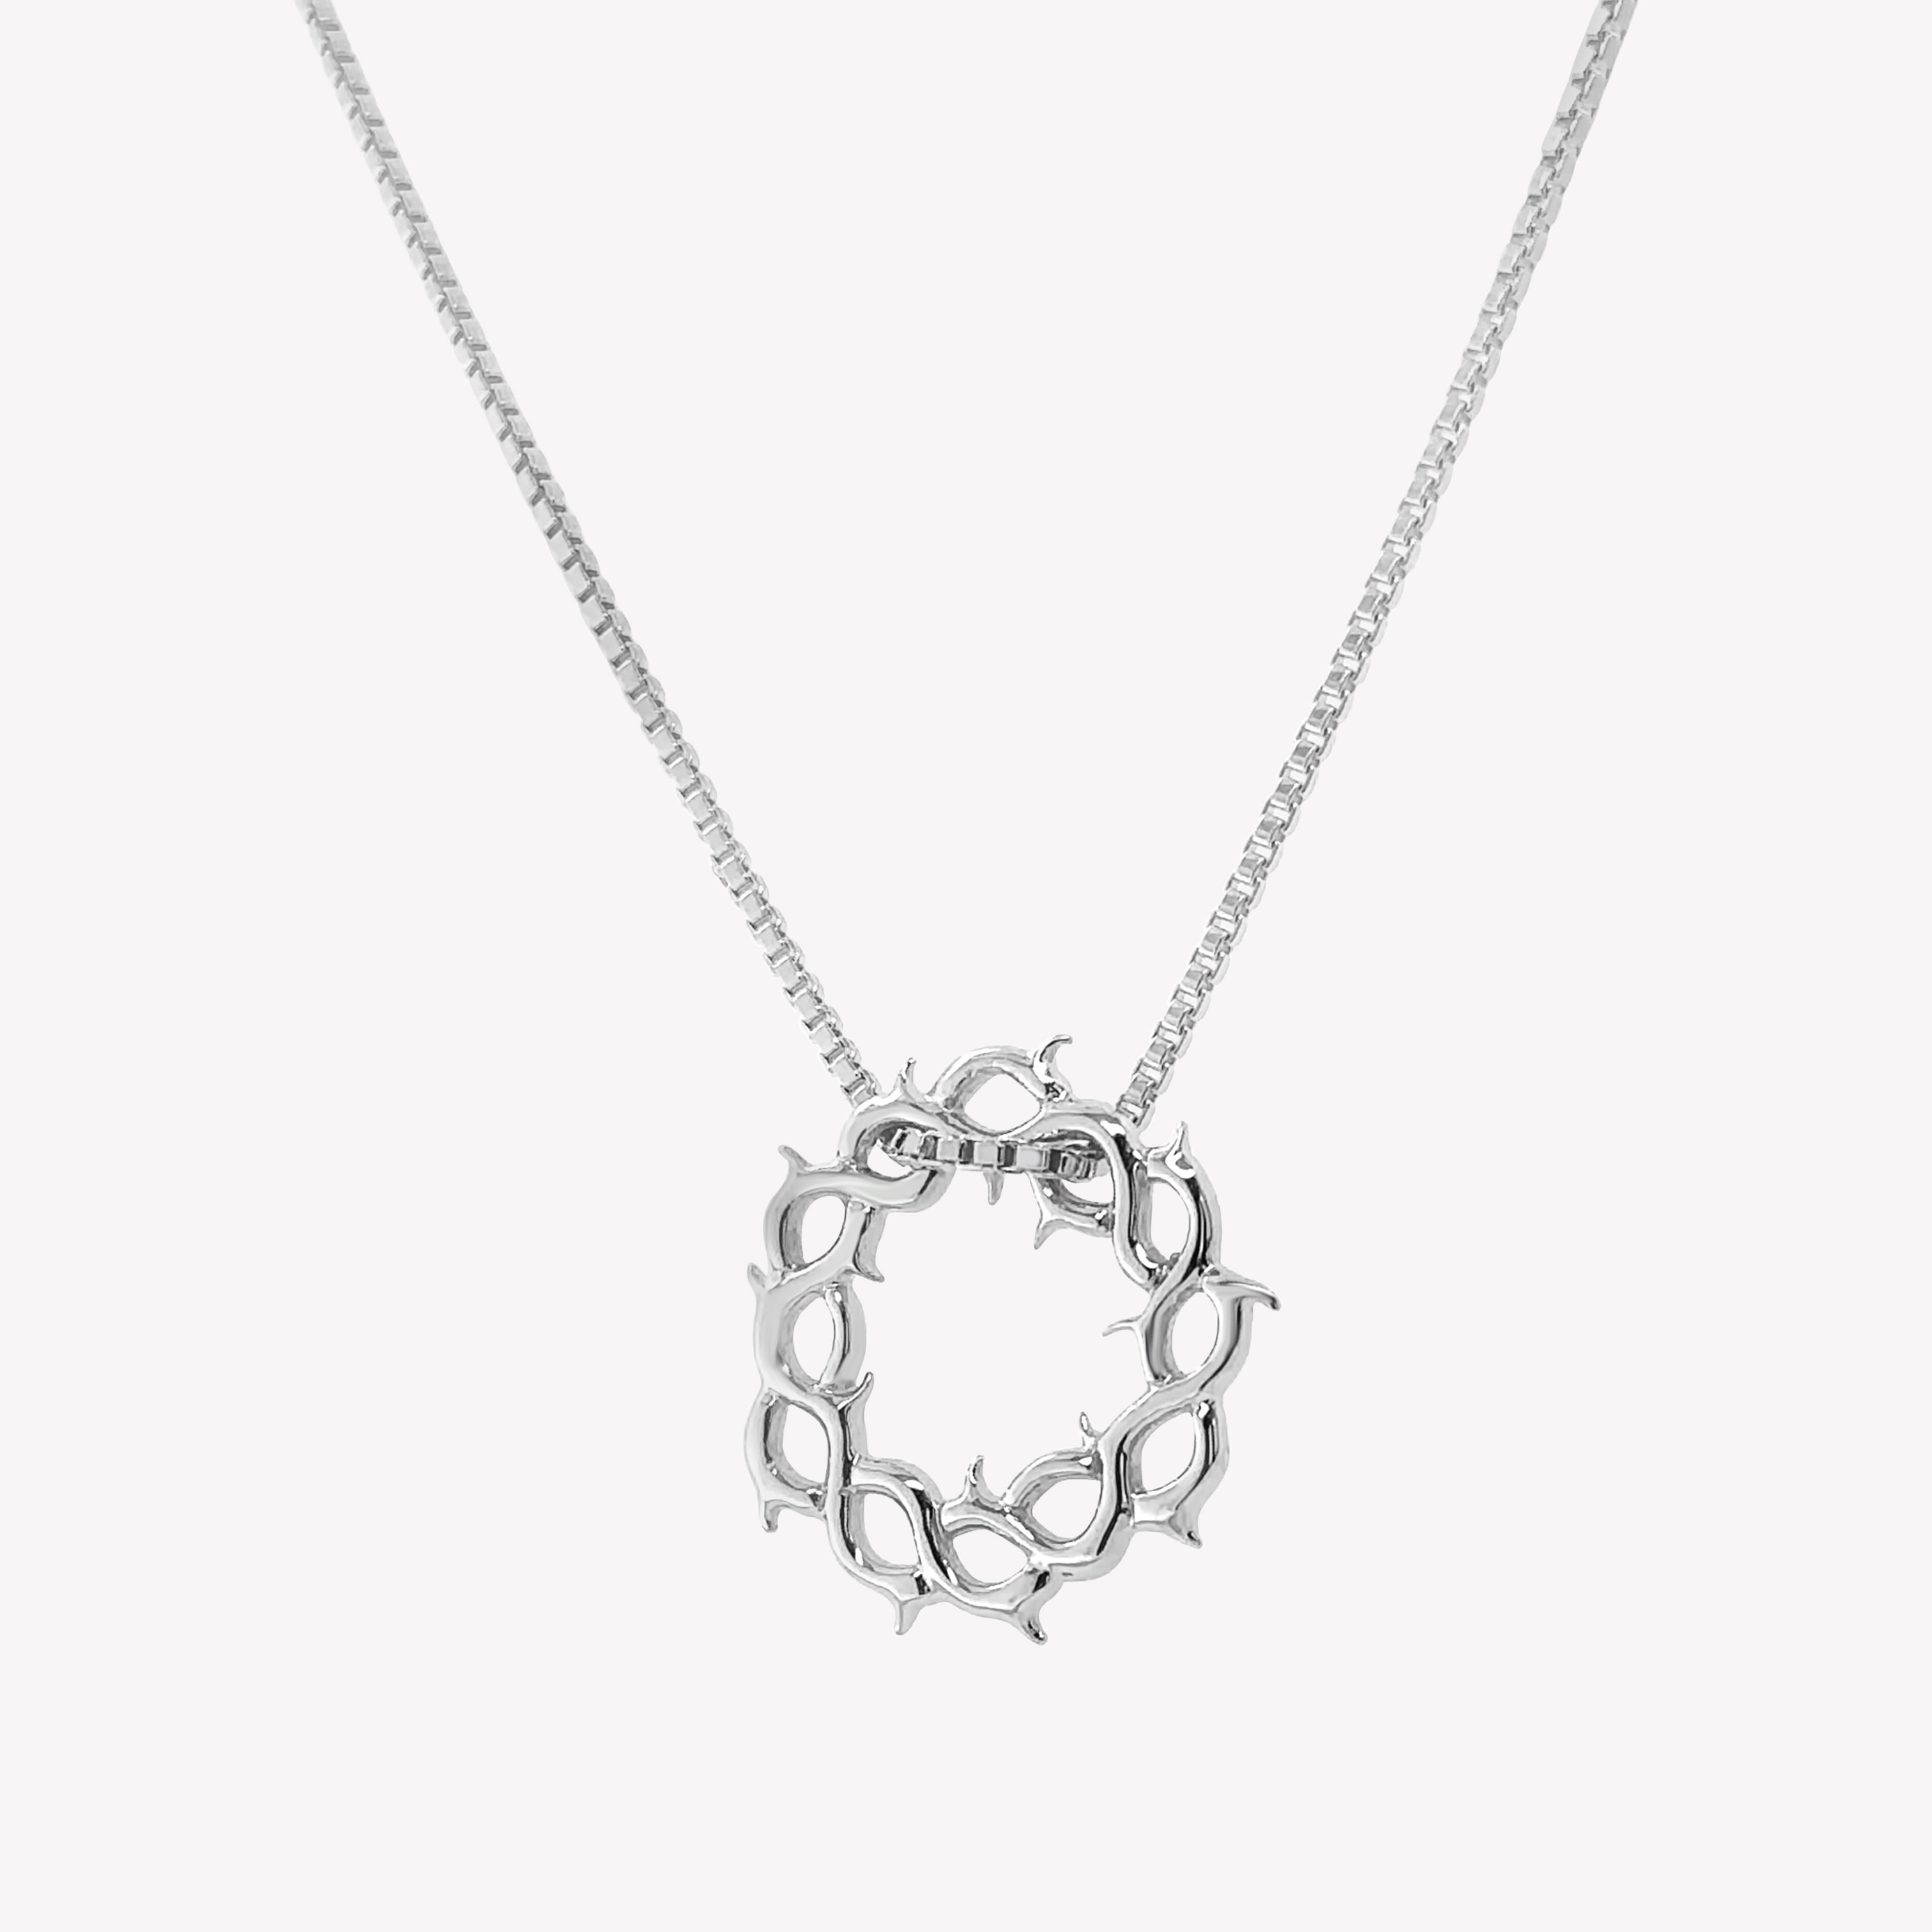 Sterling silver Crown of Thorns Necklace by Rizen Jewelry. Box chain is threaded through faith inspired pendant. 